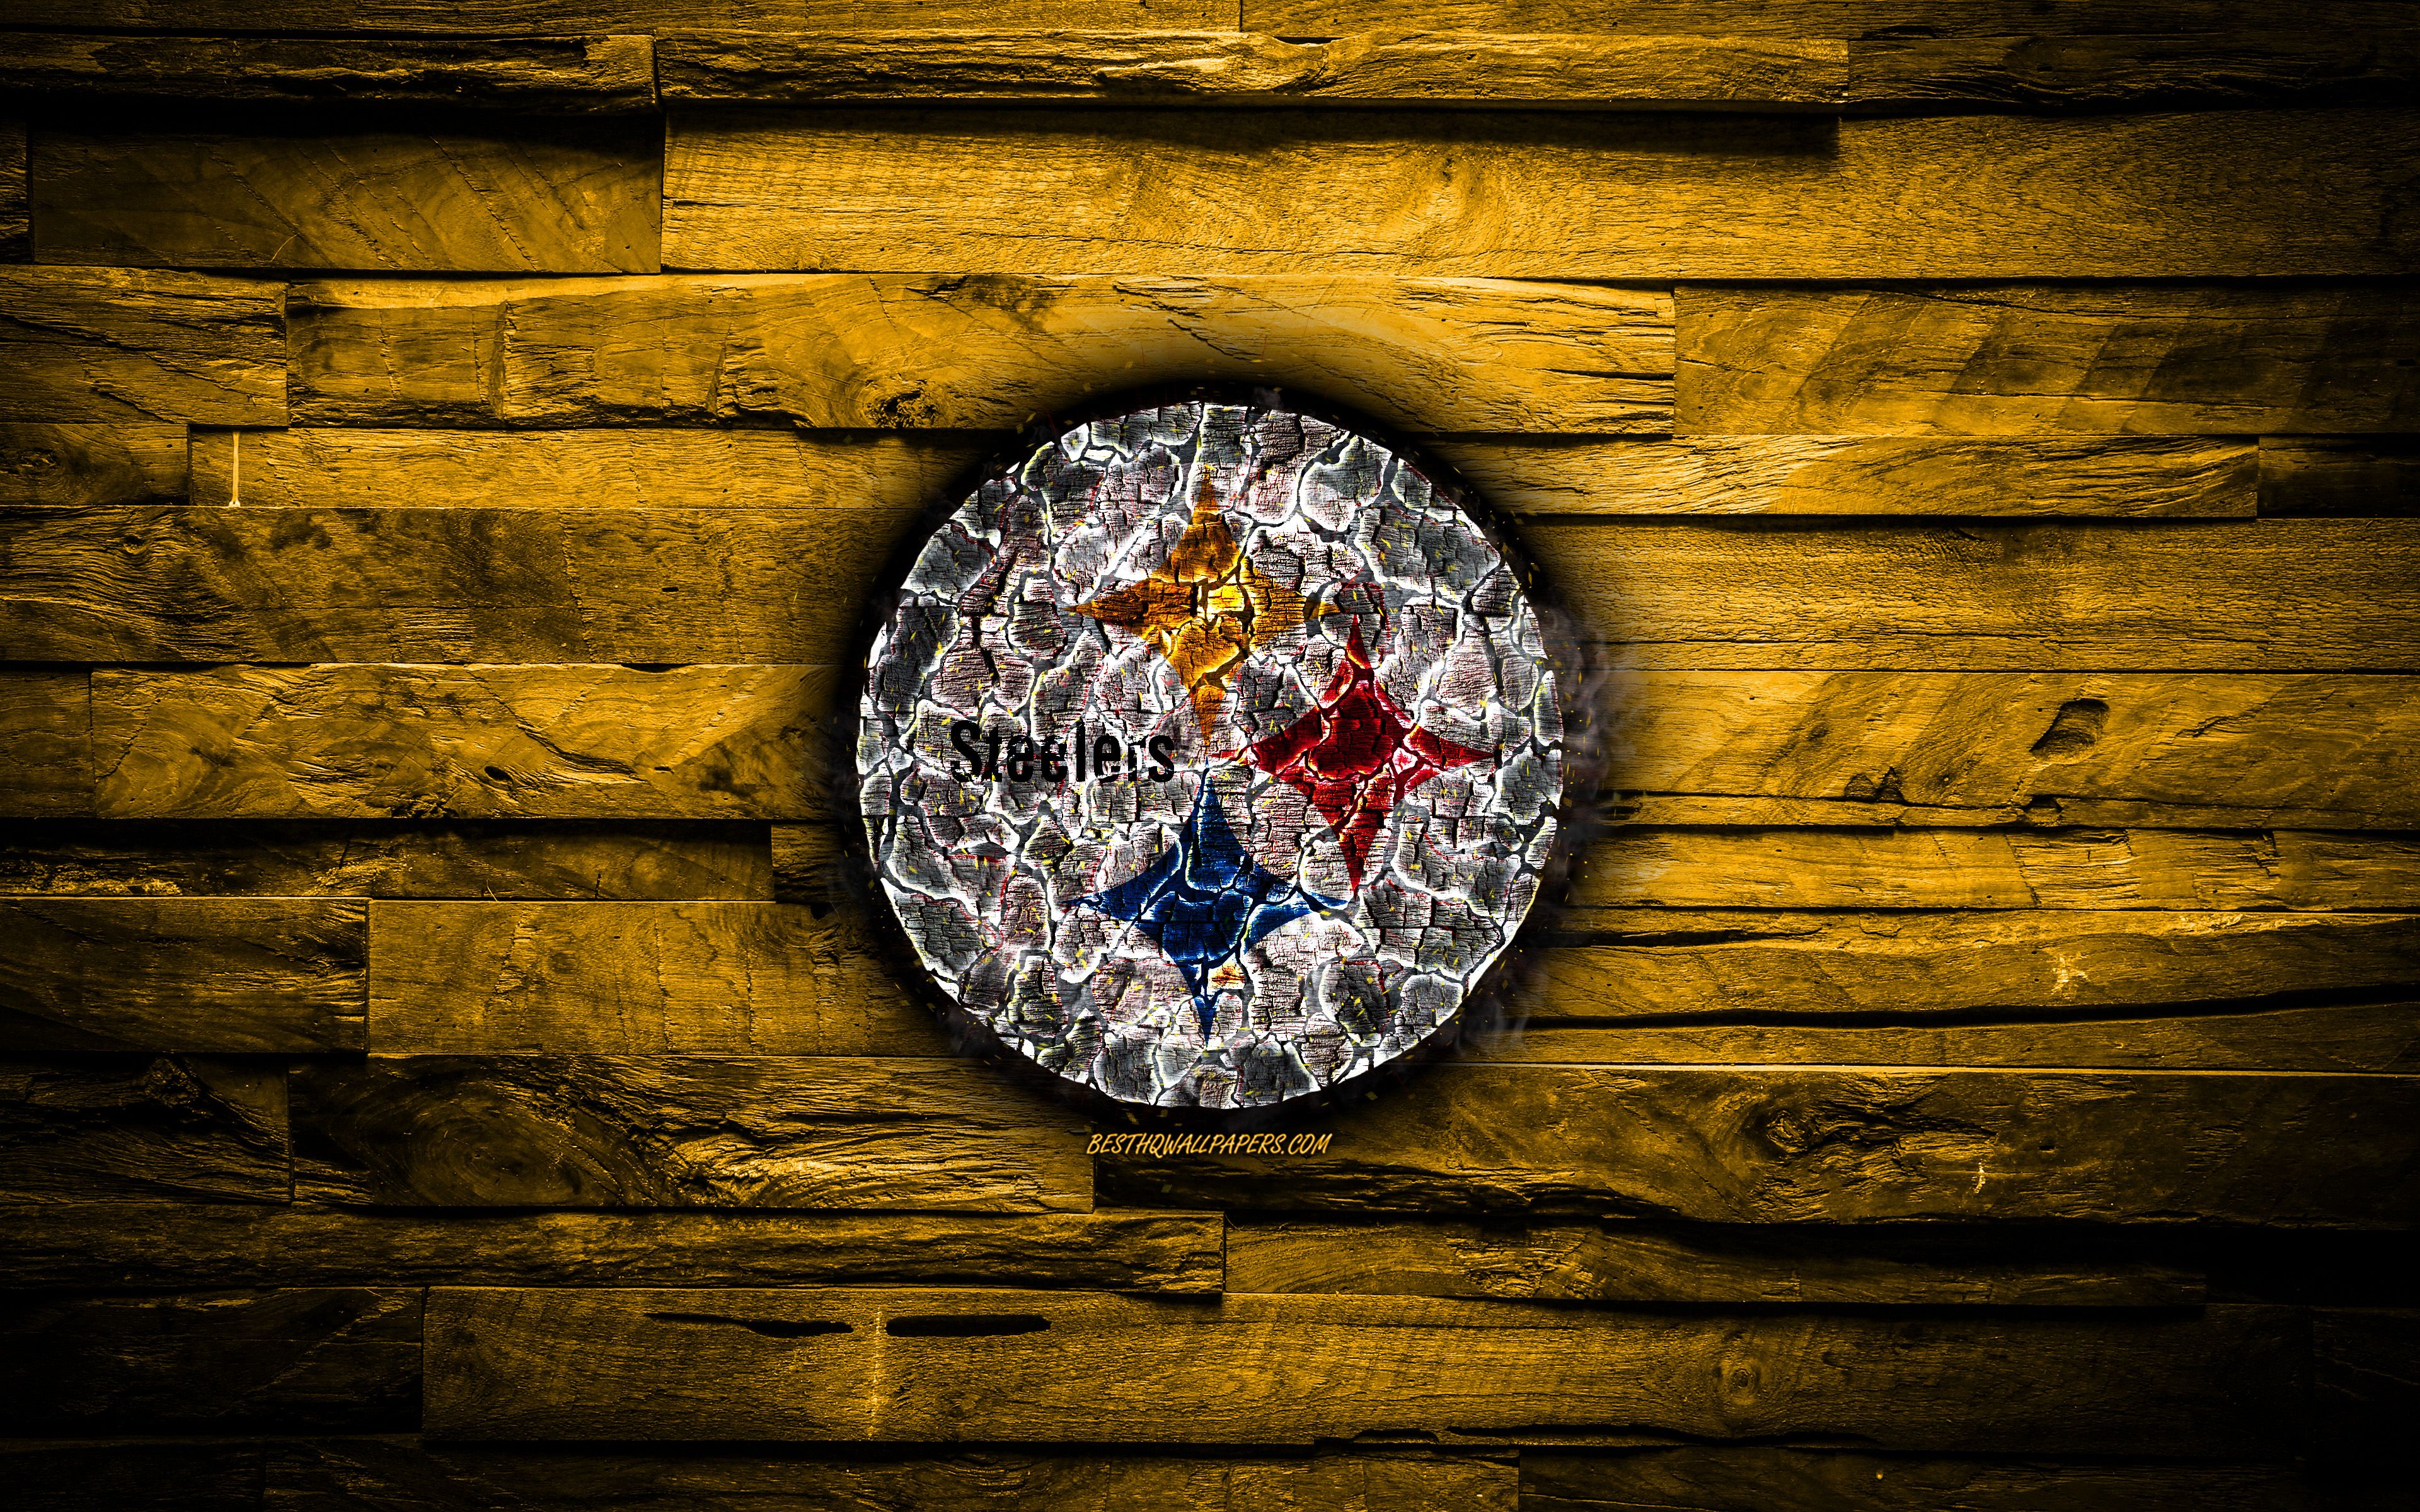 Download wallpaper Pittsburgh Steelers, 4k, scorched logo, NFL, yellow wooden background, american baseball team, American Football Conference, grunge, baseball, Pittsburgh Steelers logo, fire texture, USA, AFC for desktop with resolution 3840x2400. High